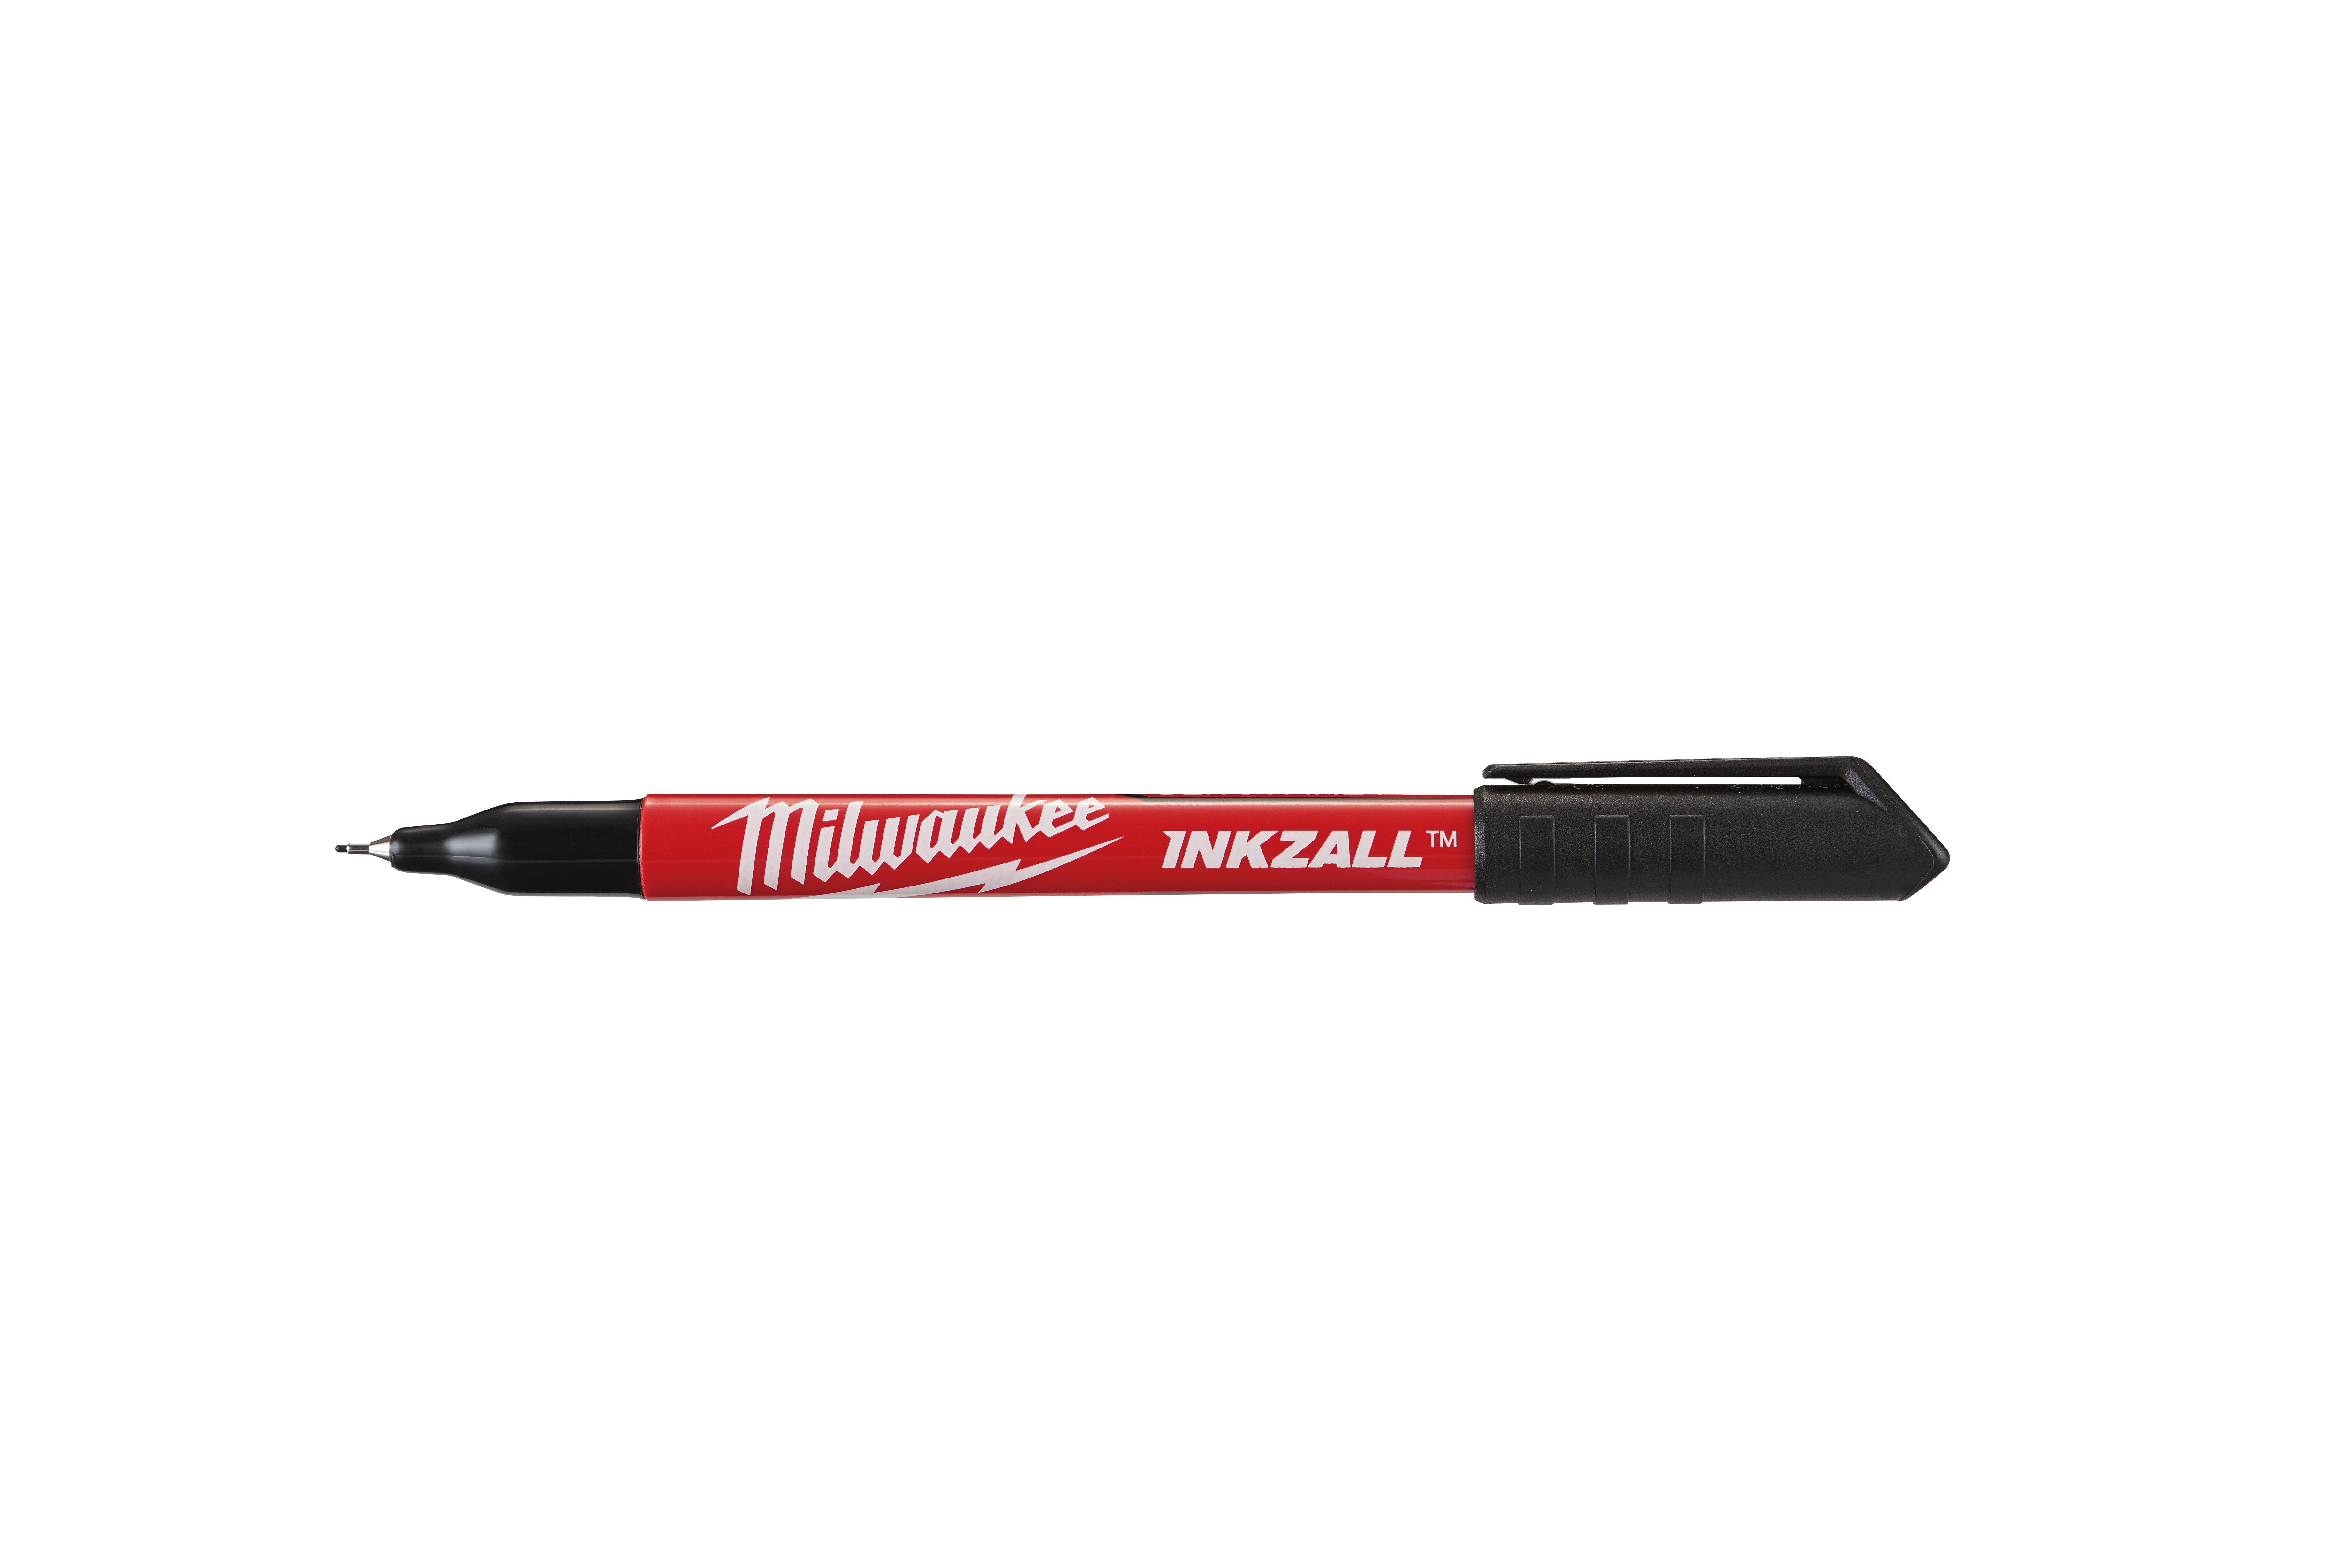 48-22-3160 045242479788 Milwaukee INKZALL™ ultra fine point pens are optimized for jobsite conditions and deliver sharp, precise lines. The durable ultra fine point tip delivers a 0.5 mm line for precise writing and labeling. Bleed resistant ink drys quickly and resists smears. 72 hour cap-off life delivers extended performance and use. An integrated pocket clip enables easy carry and storage.